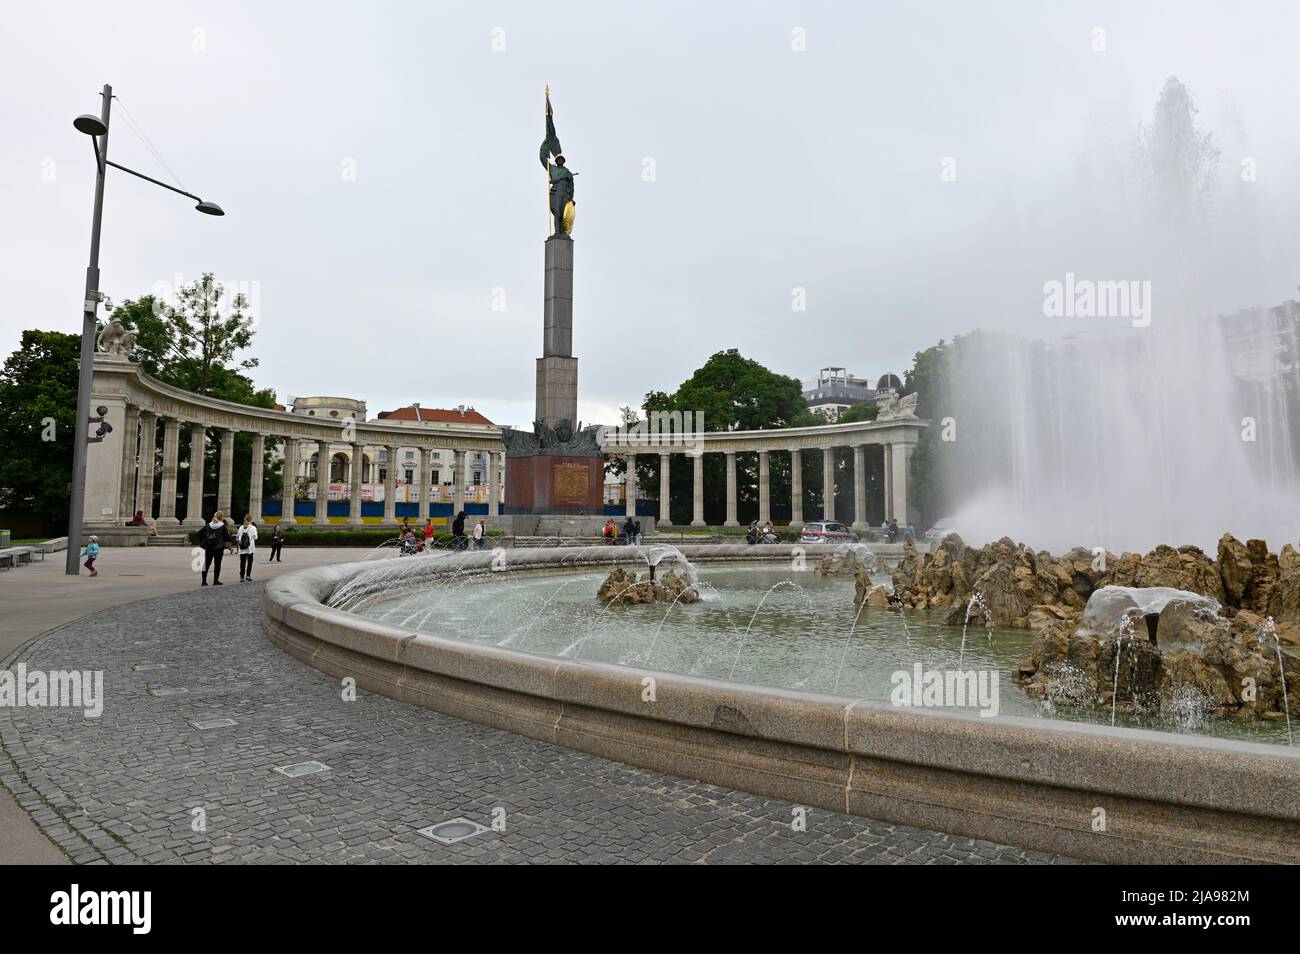 Vienna, Austria. Heroes' Monument on Schwarzenbergplatz with the 'brick wall' in the background in the Ukrainian national colors of blue and yellow Stock Photo